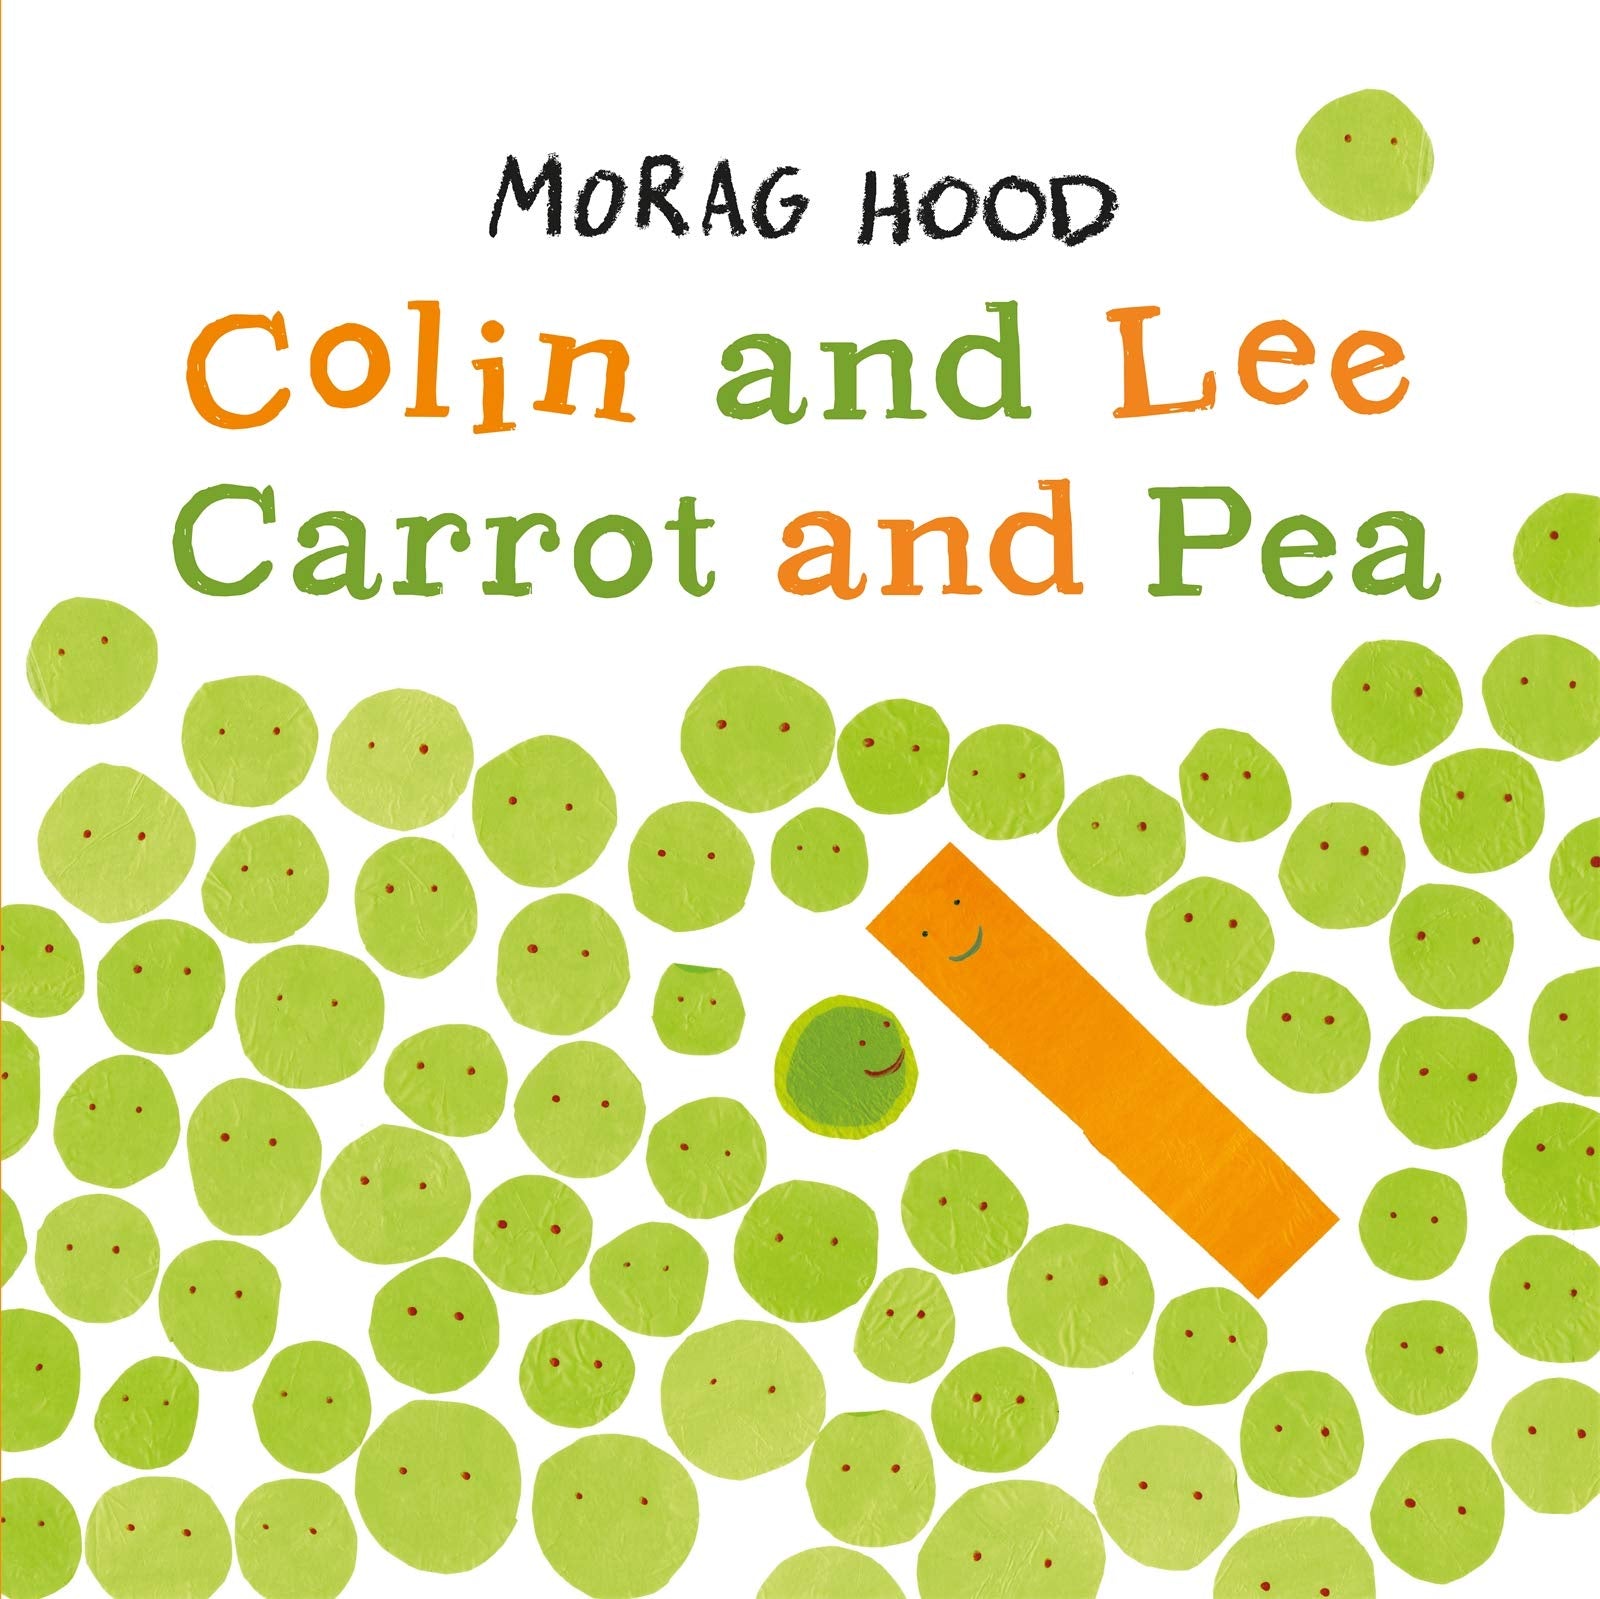 Colin and Lee Carrot and Pea by Morag Hood (Paperback Edition) | Paper Tiger